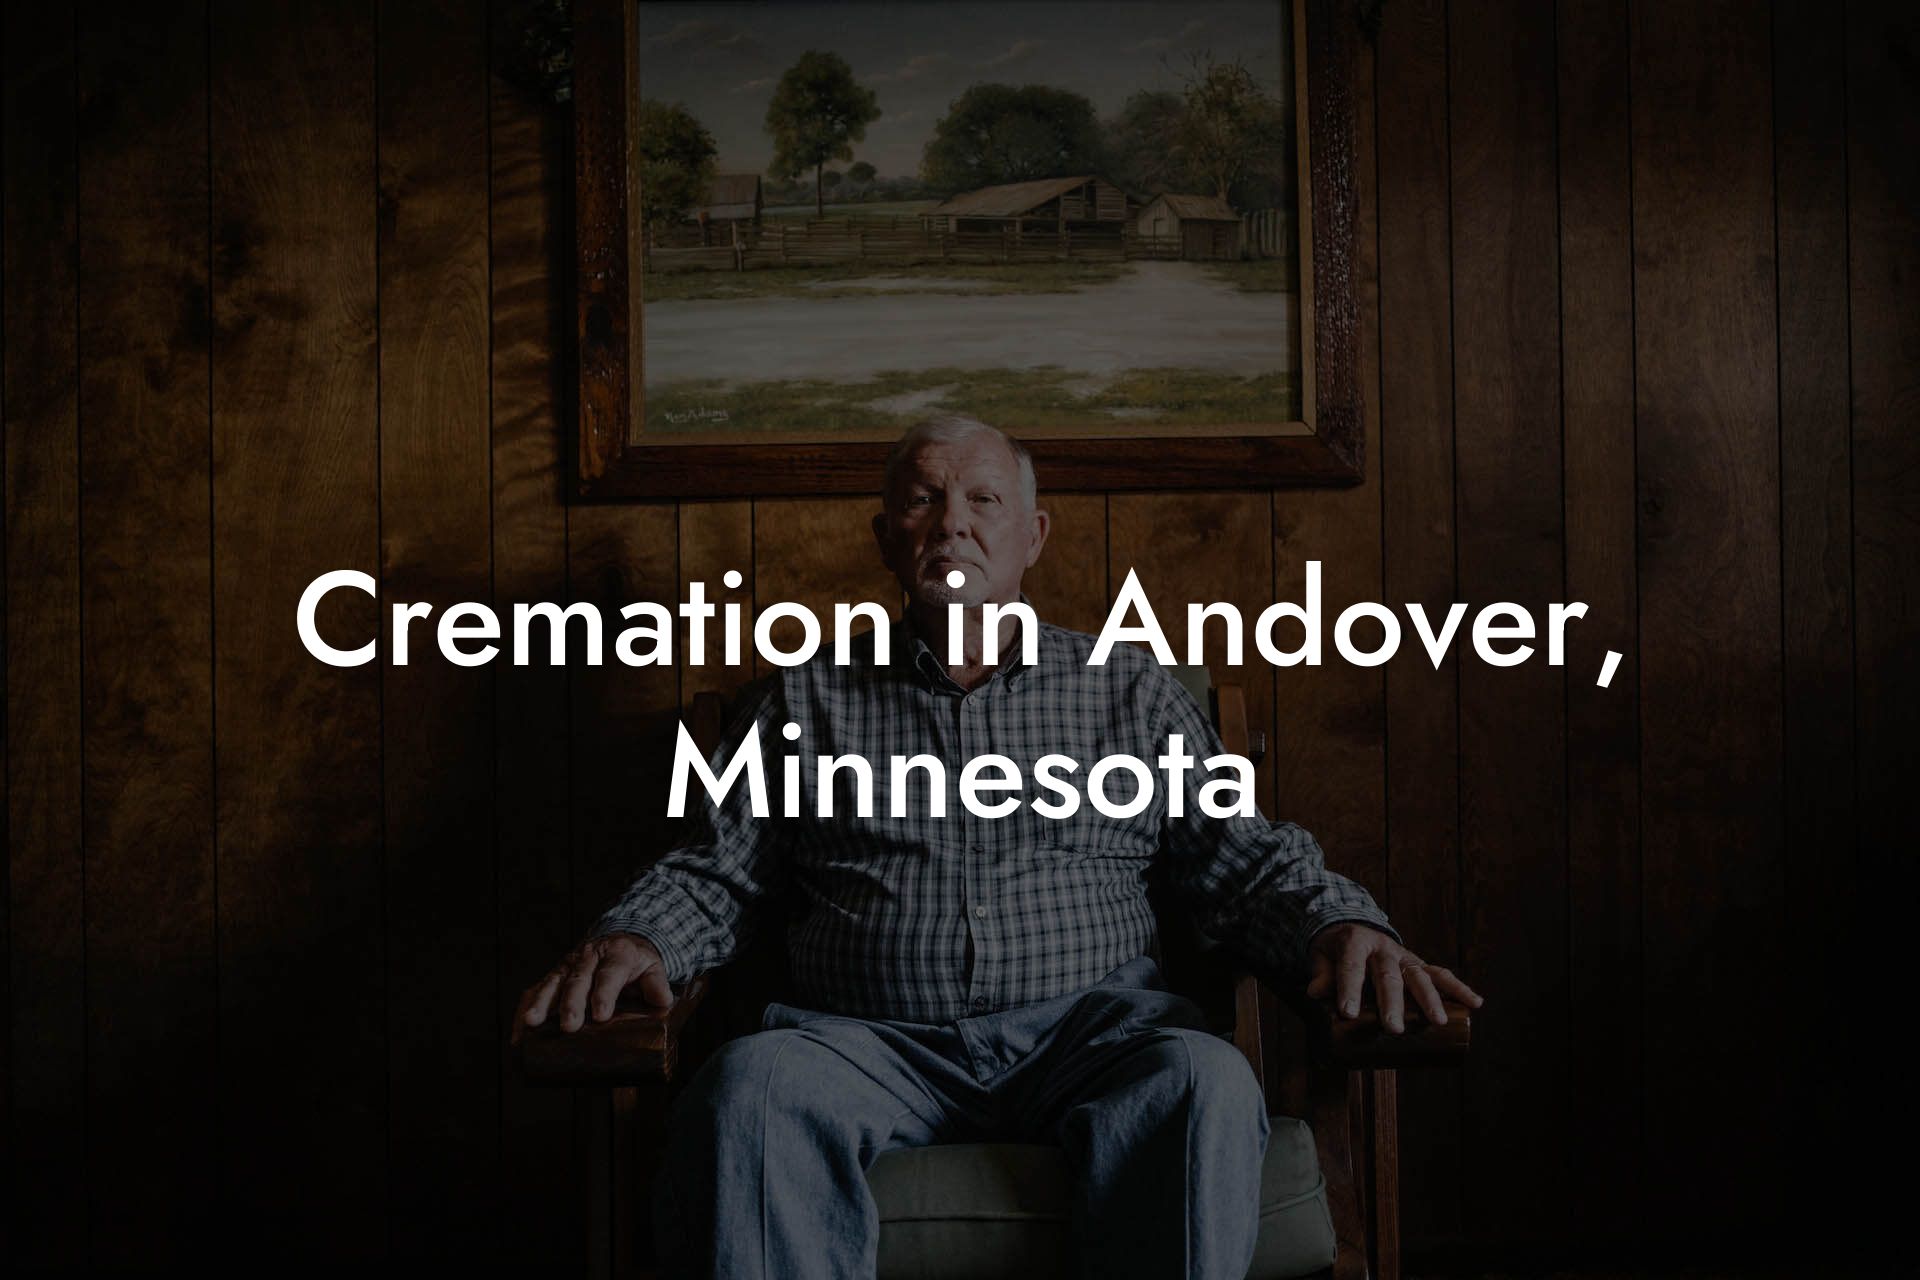 Cremation in Andover, Minnesota